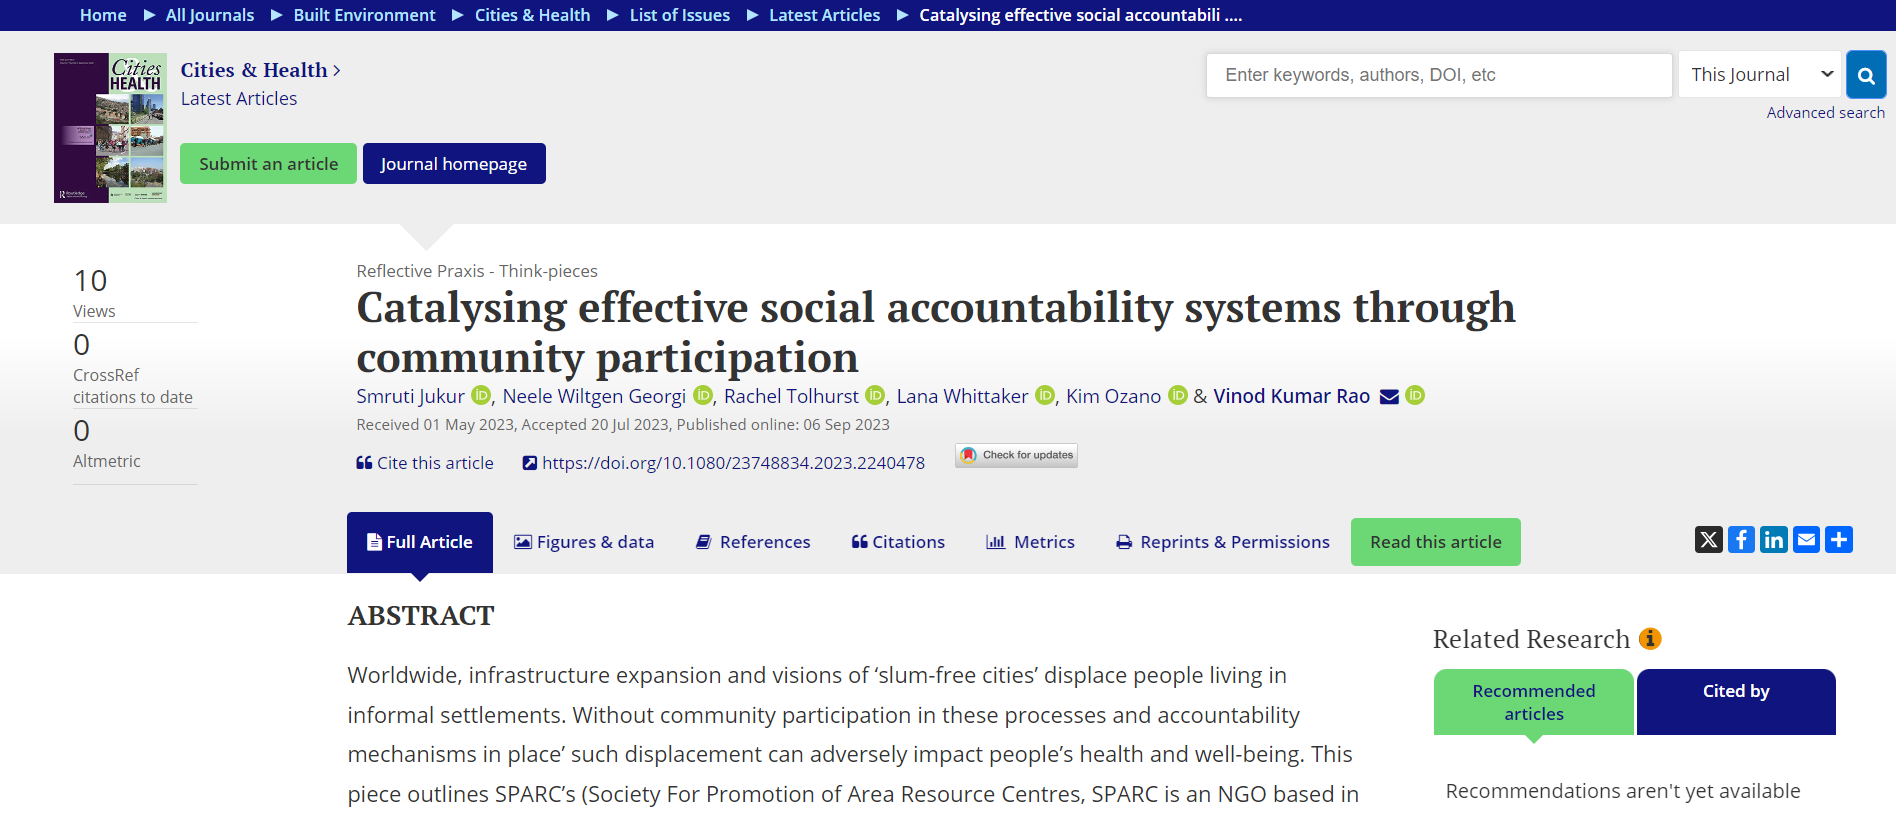 Catalysing effective social accountability systems through community participation